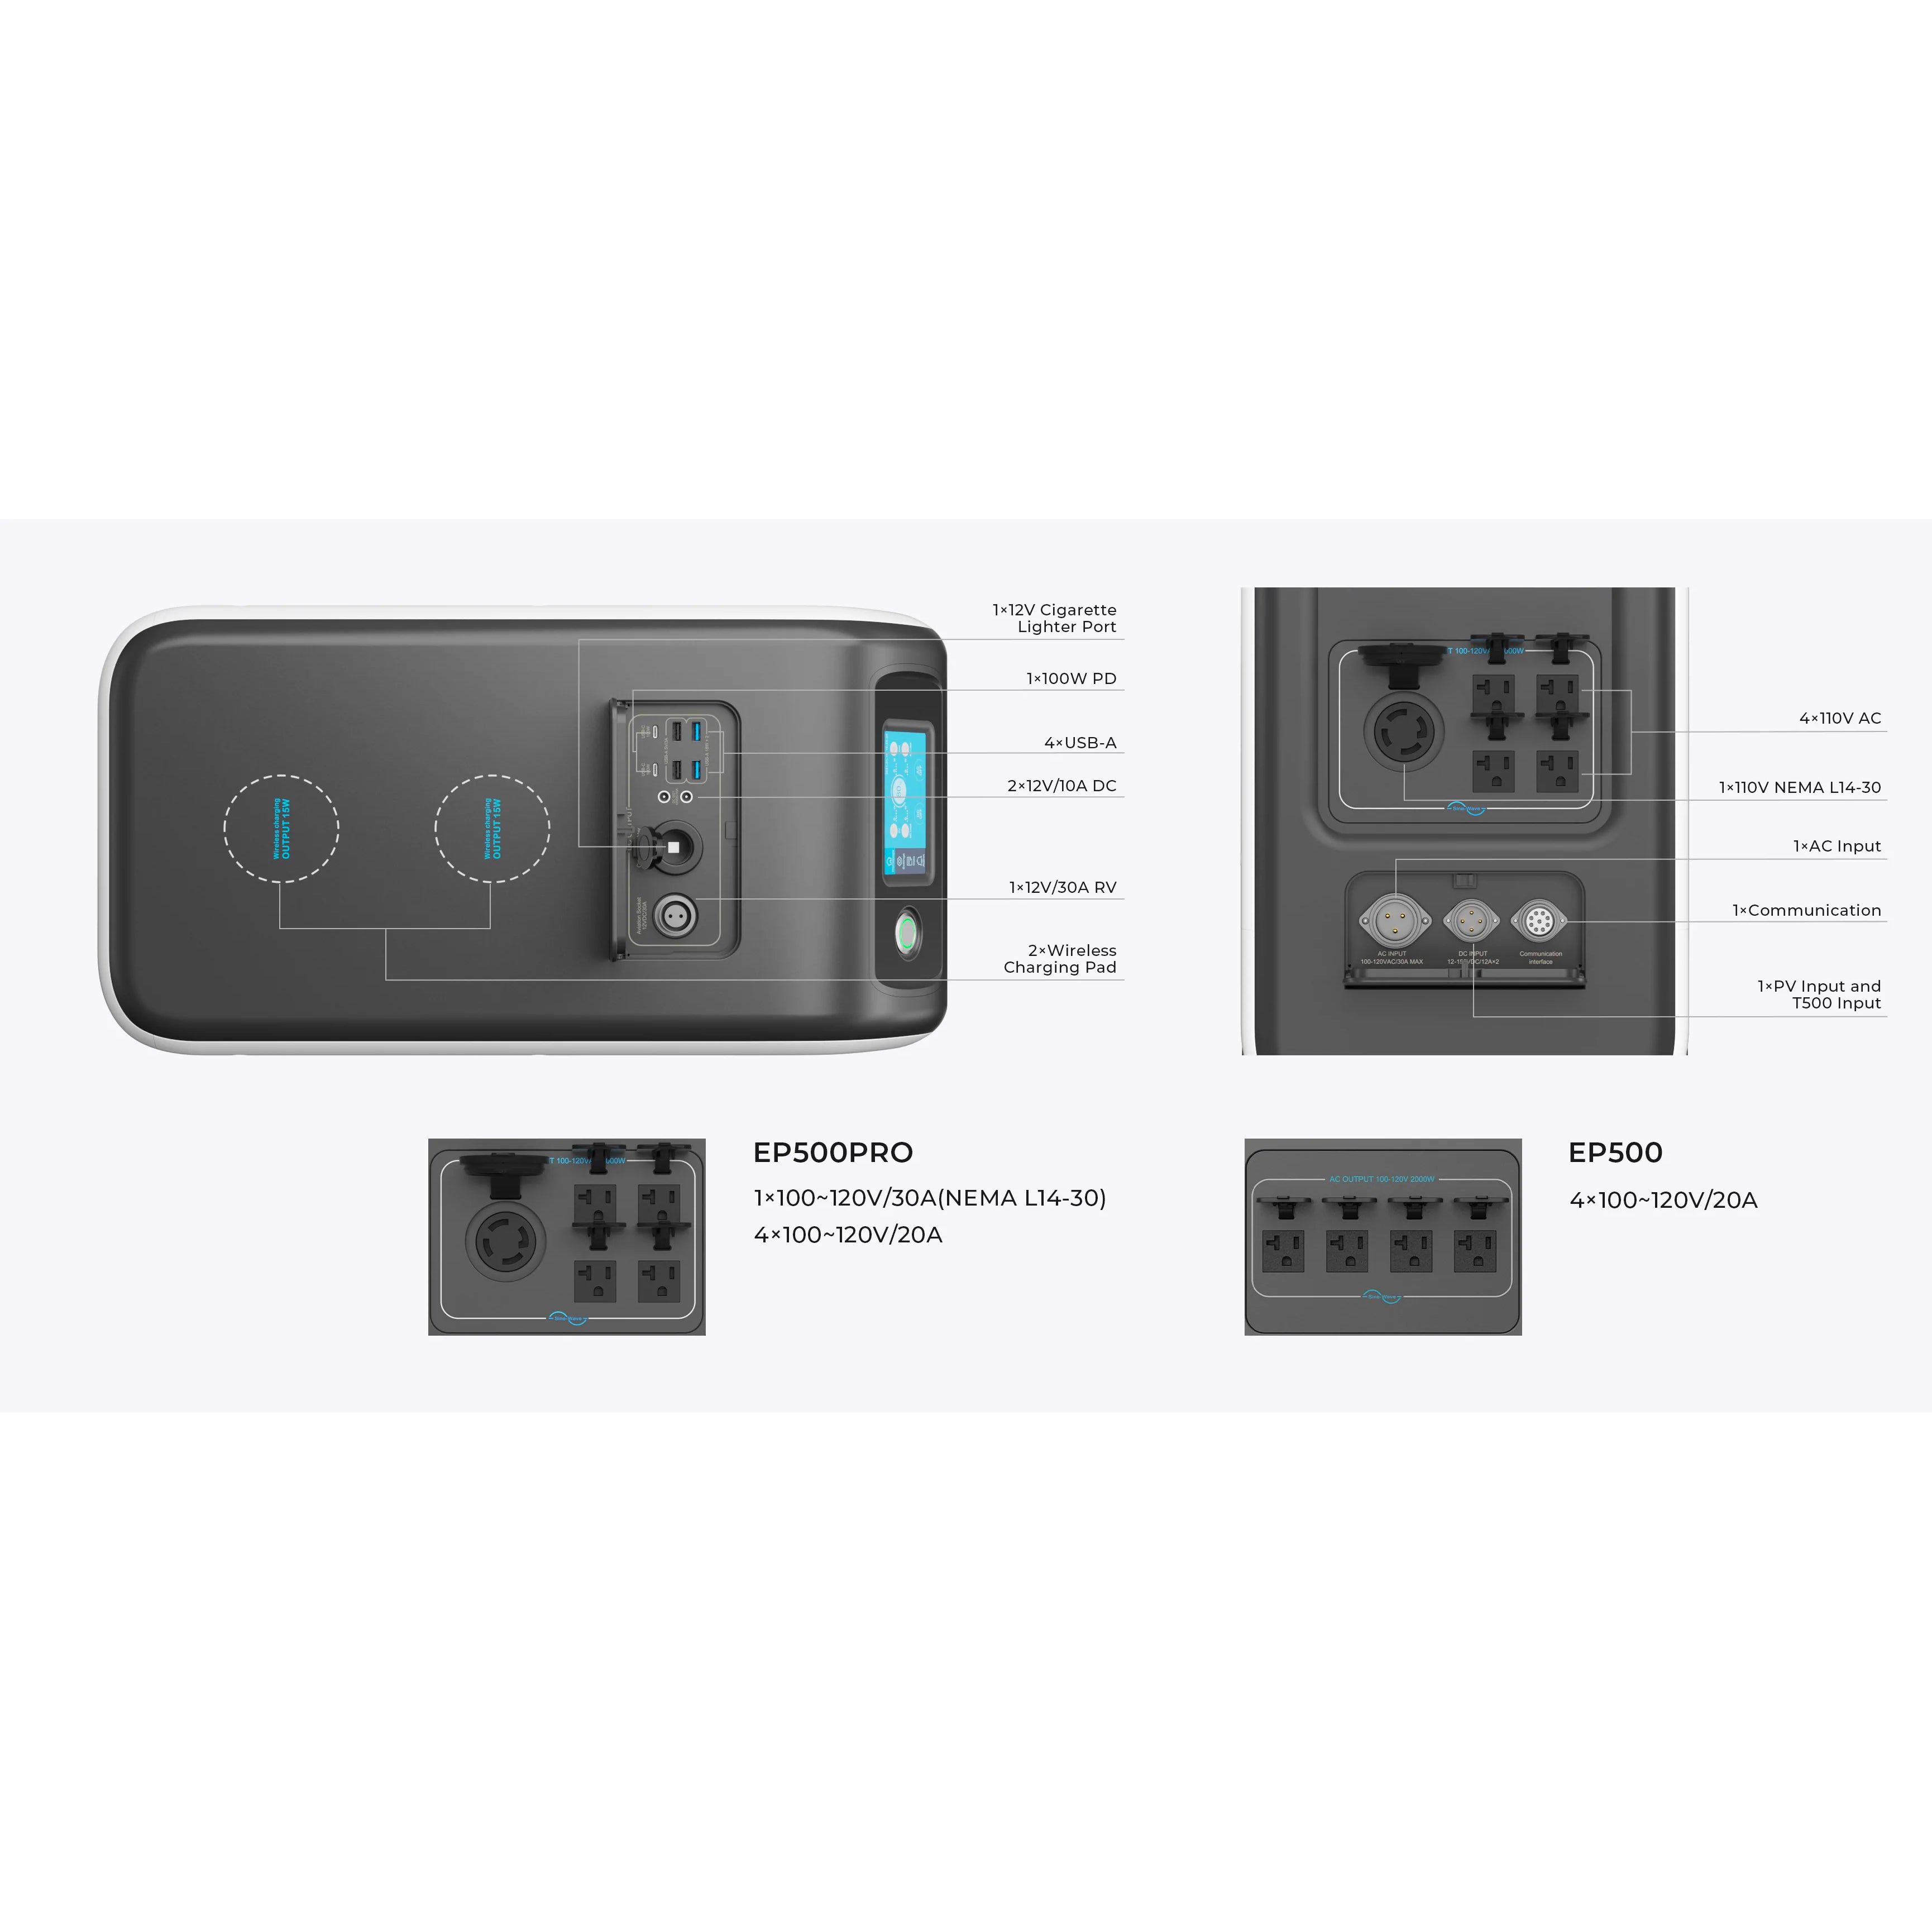 BLUETTI EP500 Pro inputs and outputs